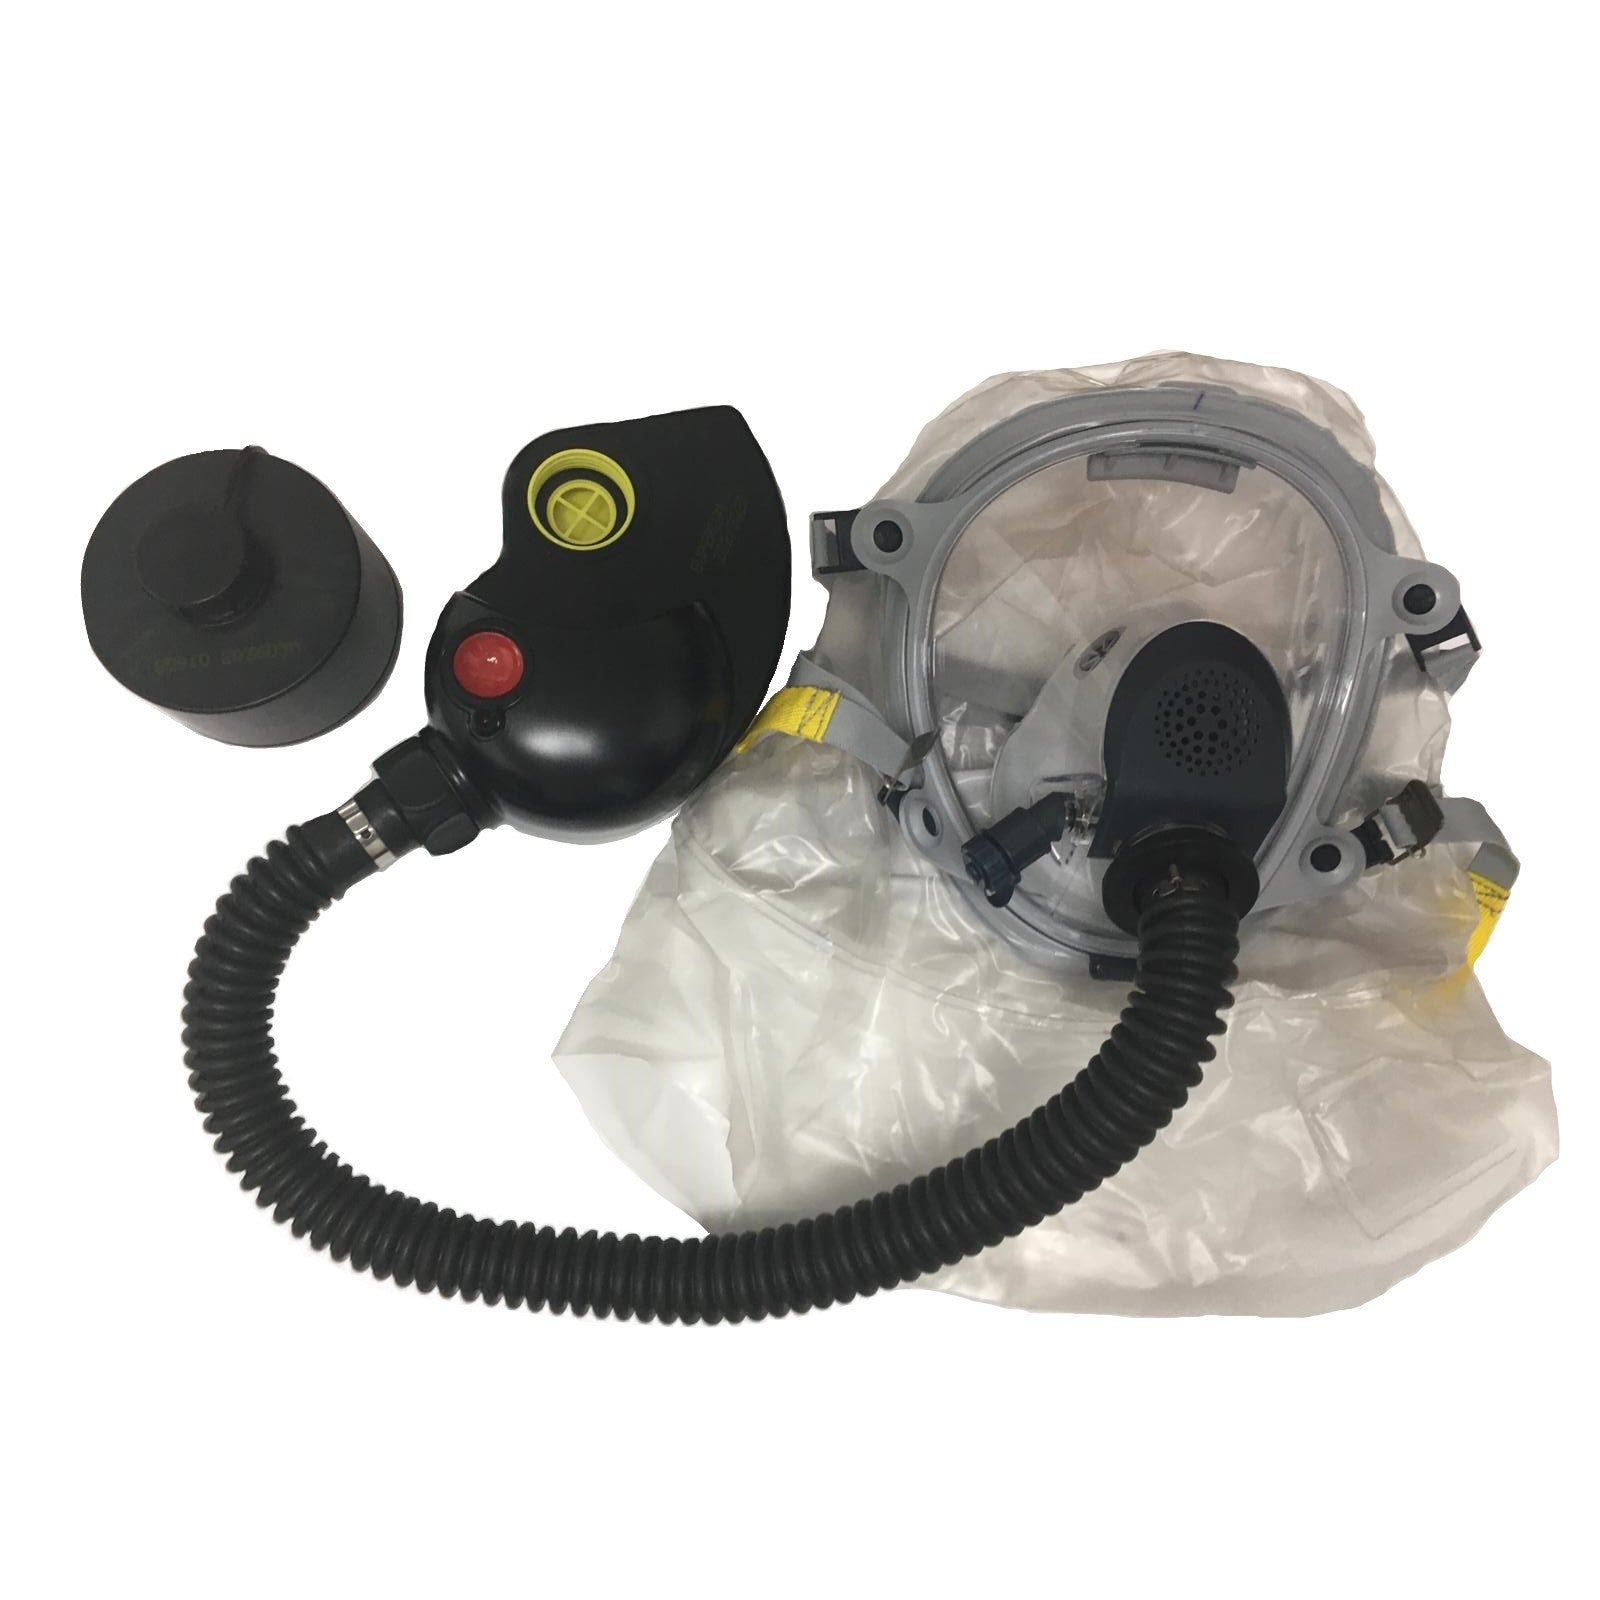 Israeli Rubber Respirator Mask NBC Protection Israeli Rubber Respirator Mask  NBC Protection, With Extra Filter – McGuire Army Navy